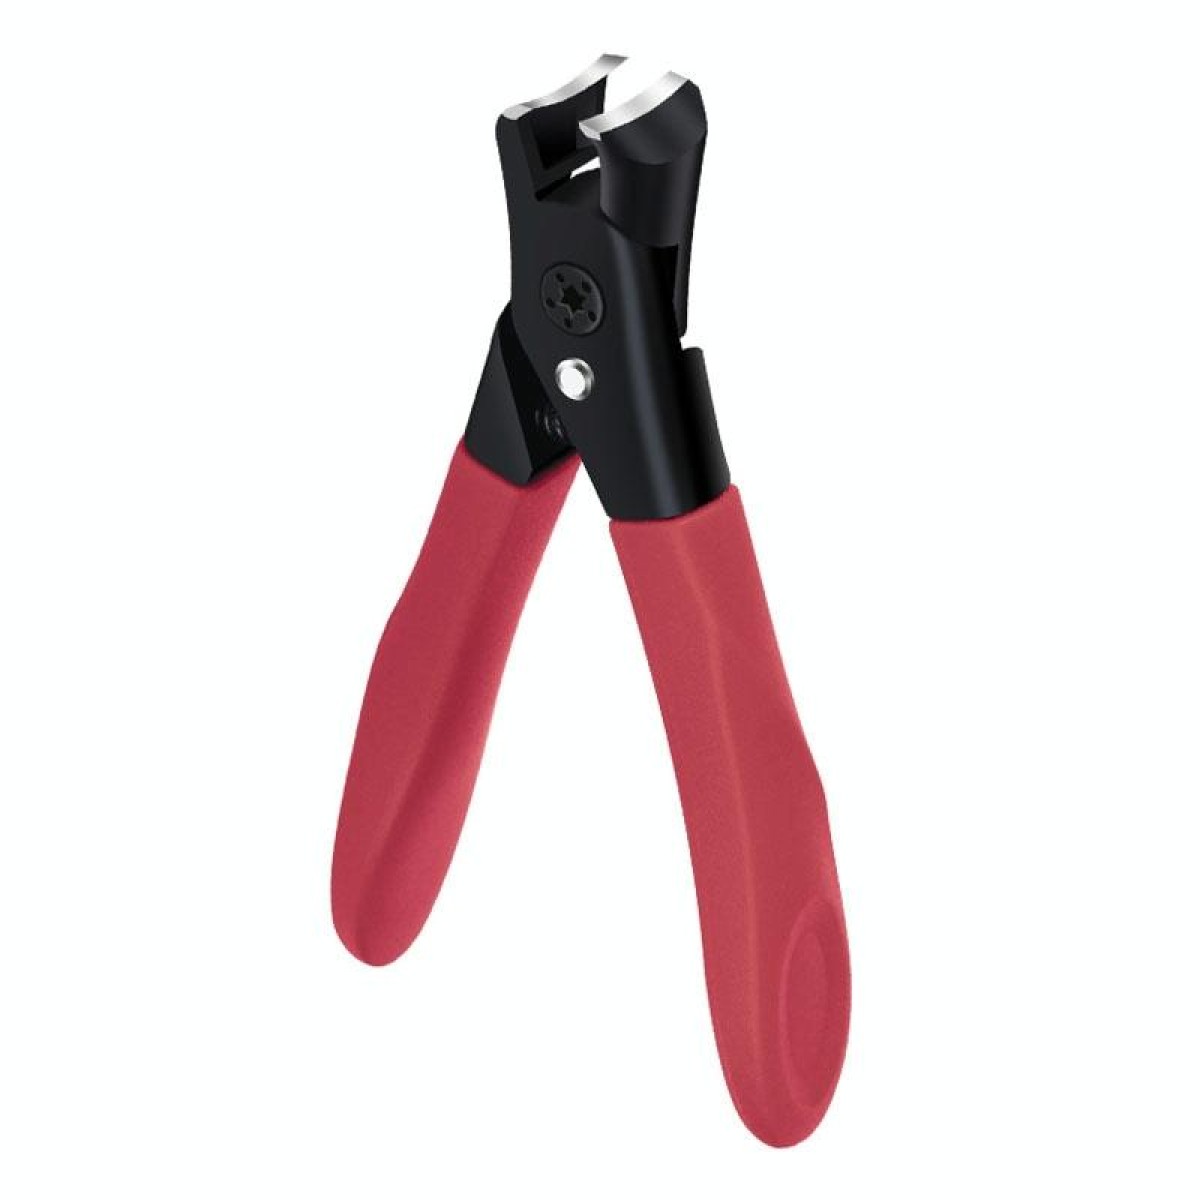 Large Opening For Thick And Hard Nail Clippers Anti-Splash Nail Scissors(Red)